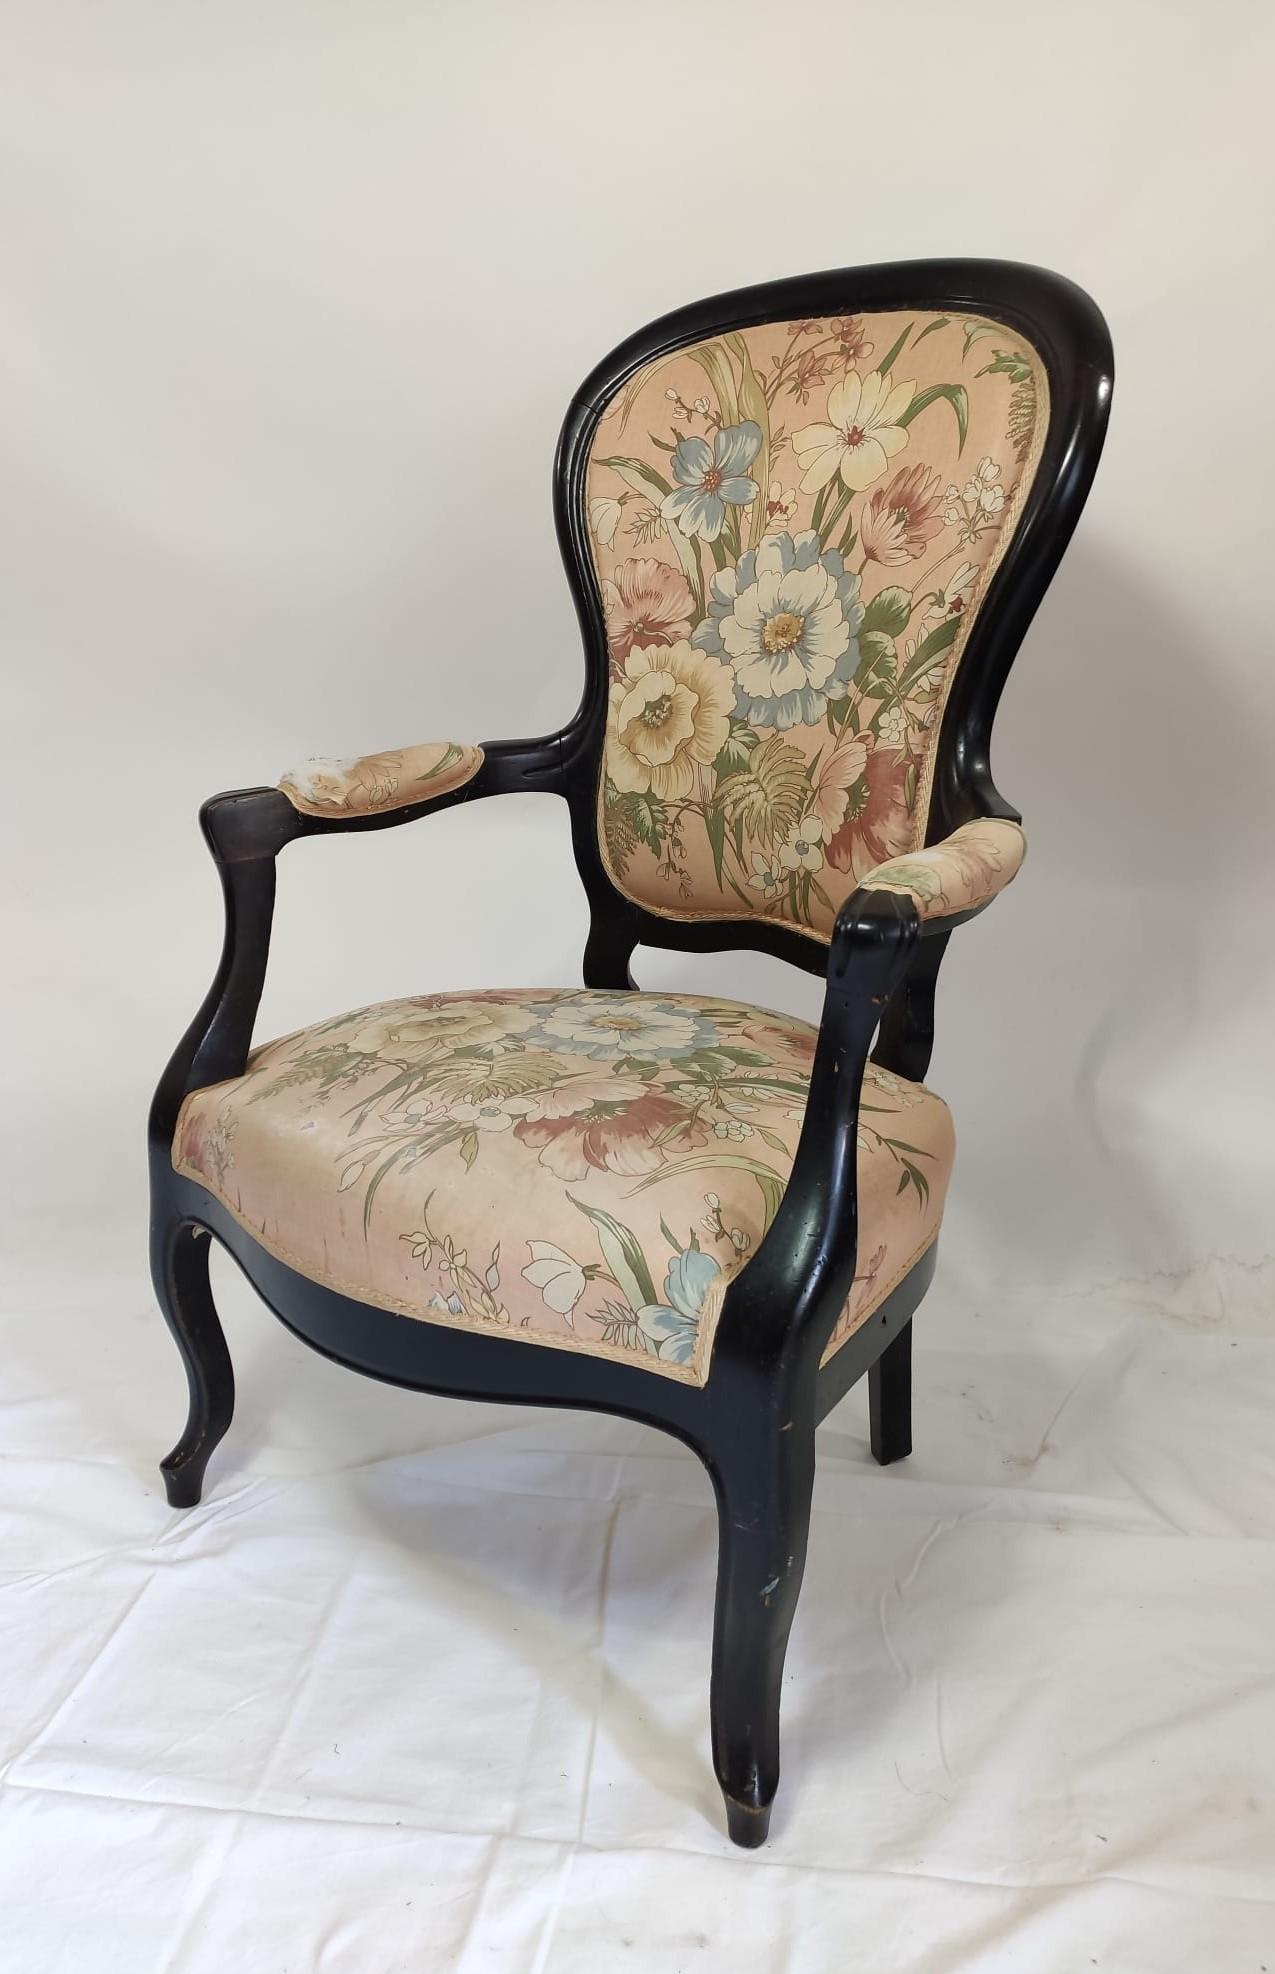 Two Armchairs in Black Wood, Napoléon III Period.
They go with a pretty bench.
Seat in excellent condition
Minor structural damages as you can see on the photos.
They are sold as is and they could be reupholstered.